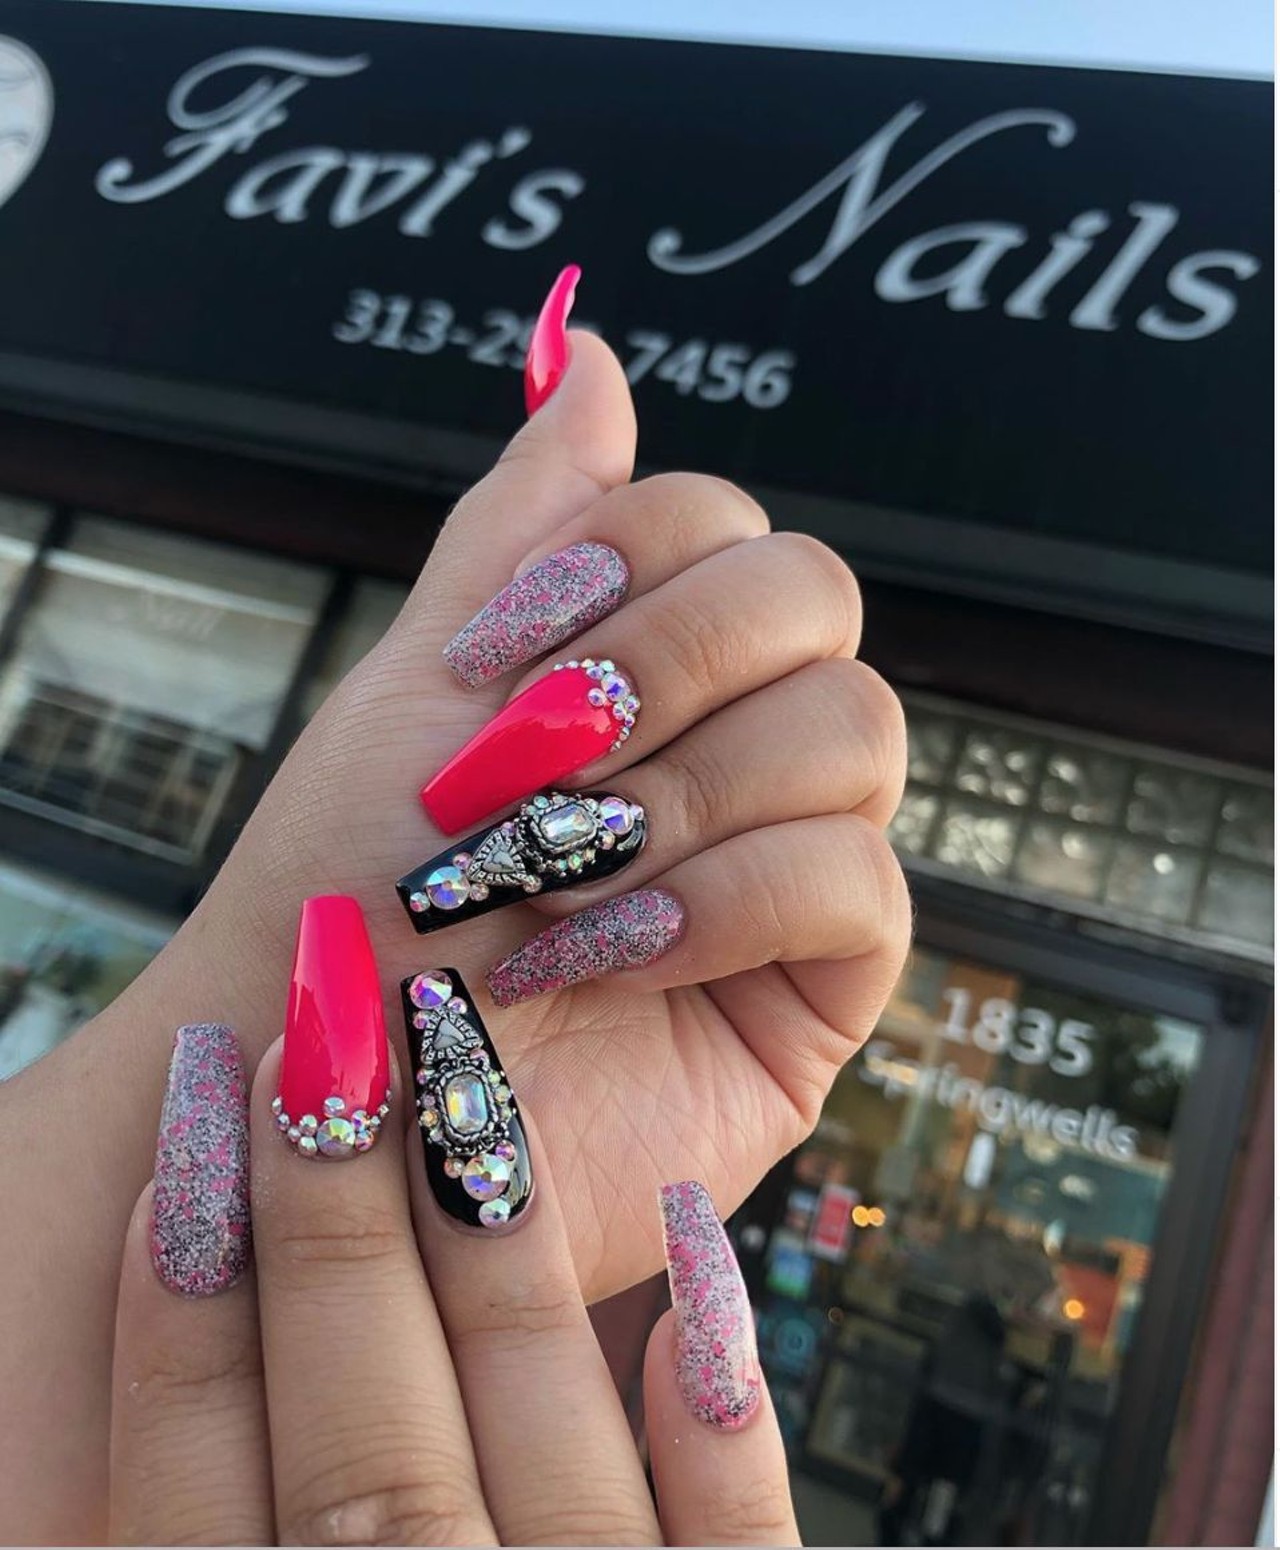 Favi&#146;s Nails
@favisnails
1835 Springwells, Detroit 
Favi&#146;s Nails is located in Southwest Detroit and is closed Sundays and Mondays. One Yelp reviewer described Favi&#146;s as a &#147;Downriver&#146;s hidden jewel.&#148; Other Yelp reviewers wrote that they travel from Ohio and Troy to get their nails done here.
Photo via  Favi&#146;s Nails / Instagram 